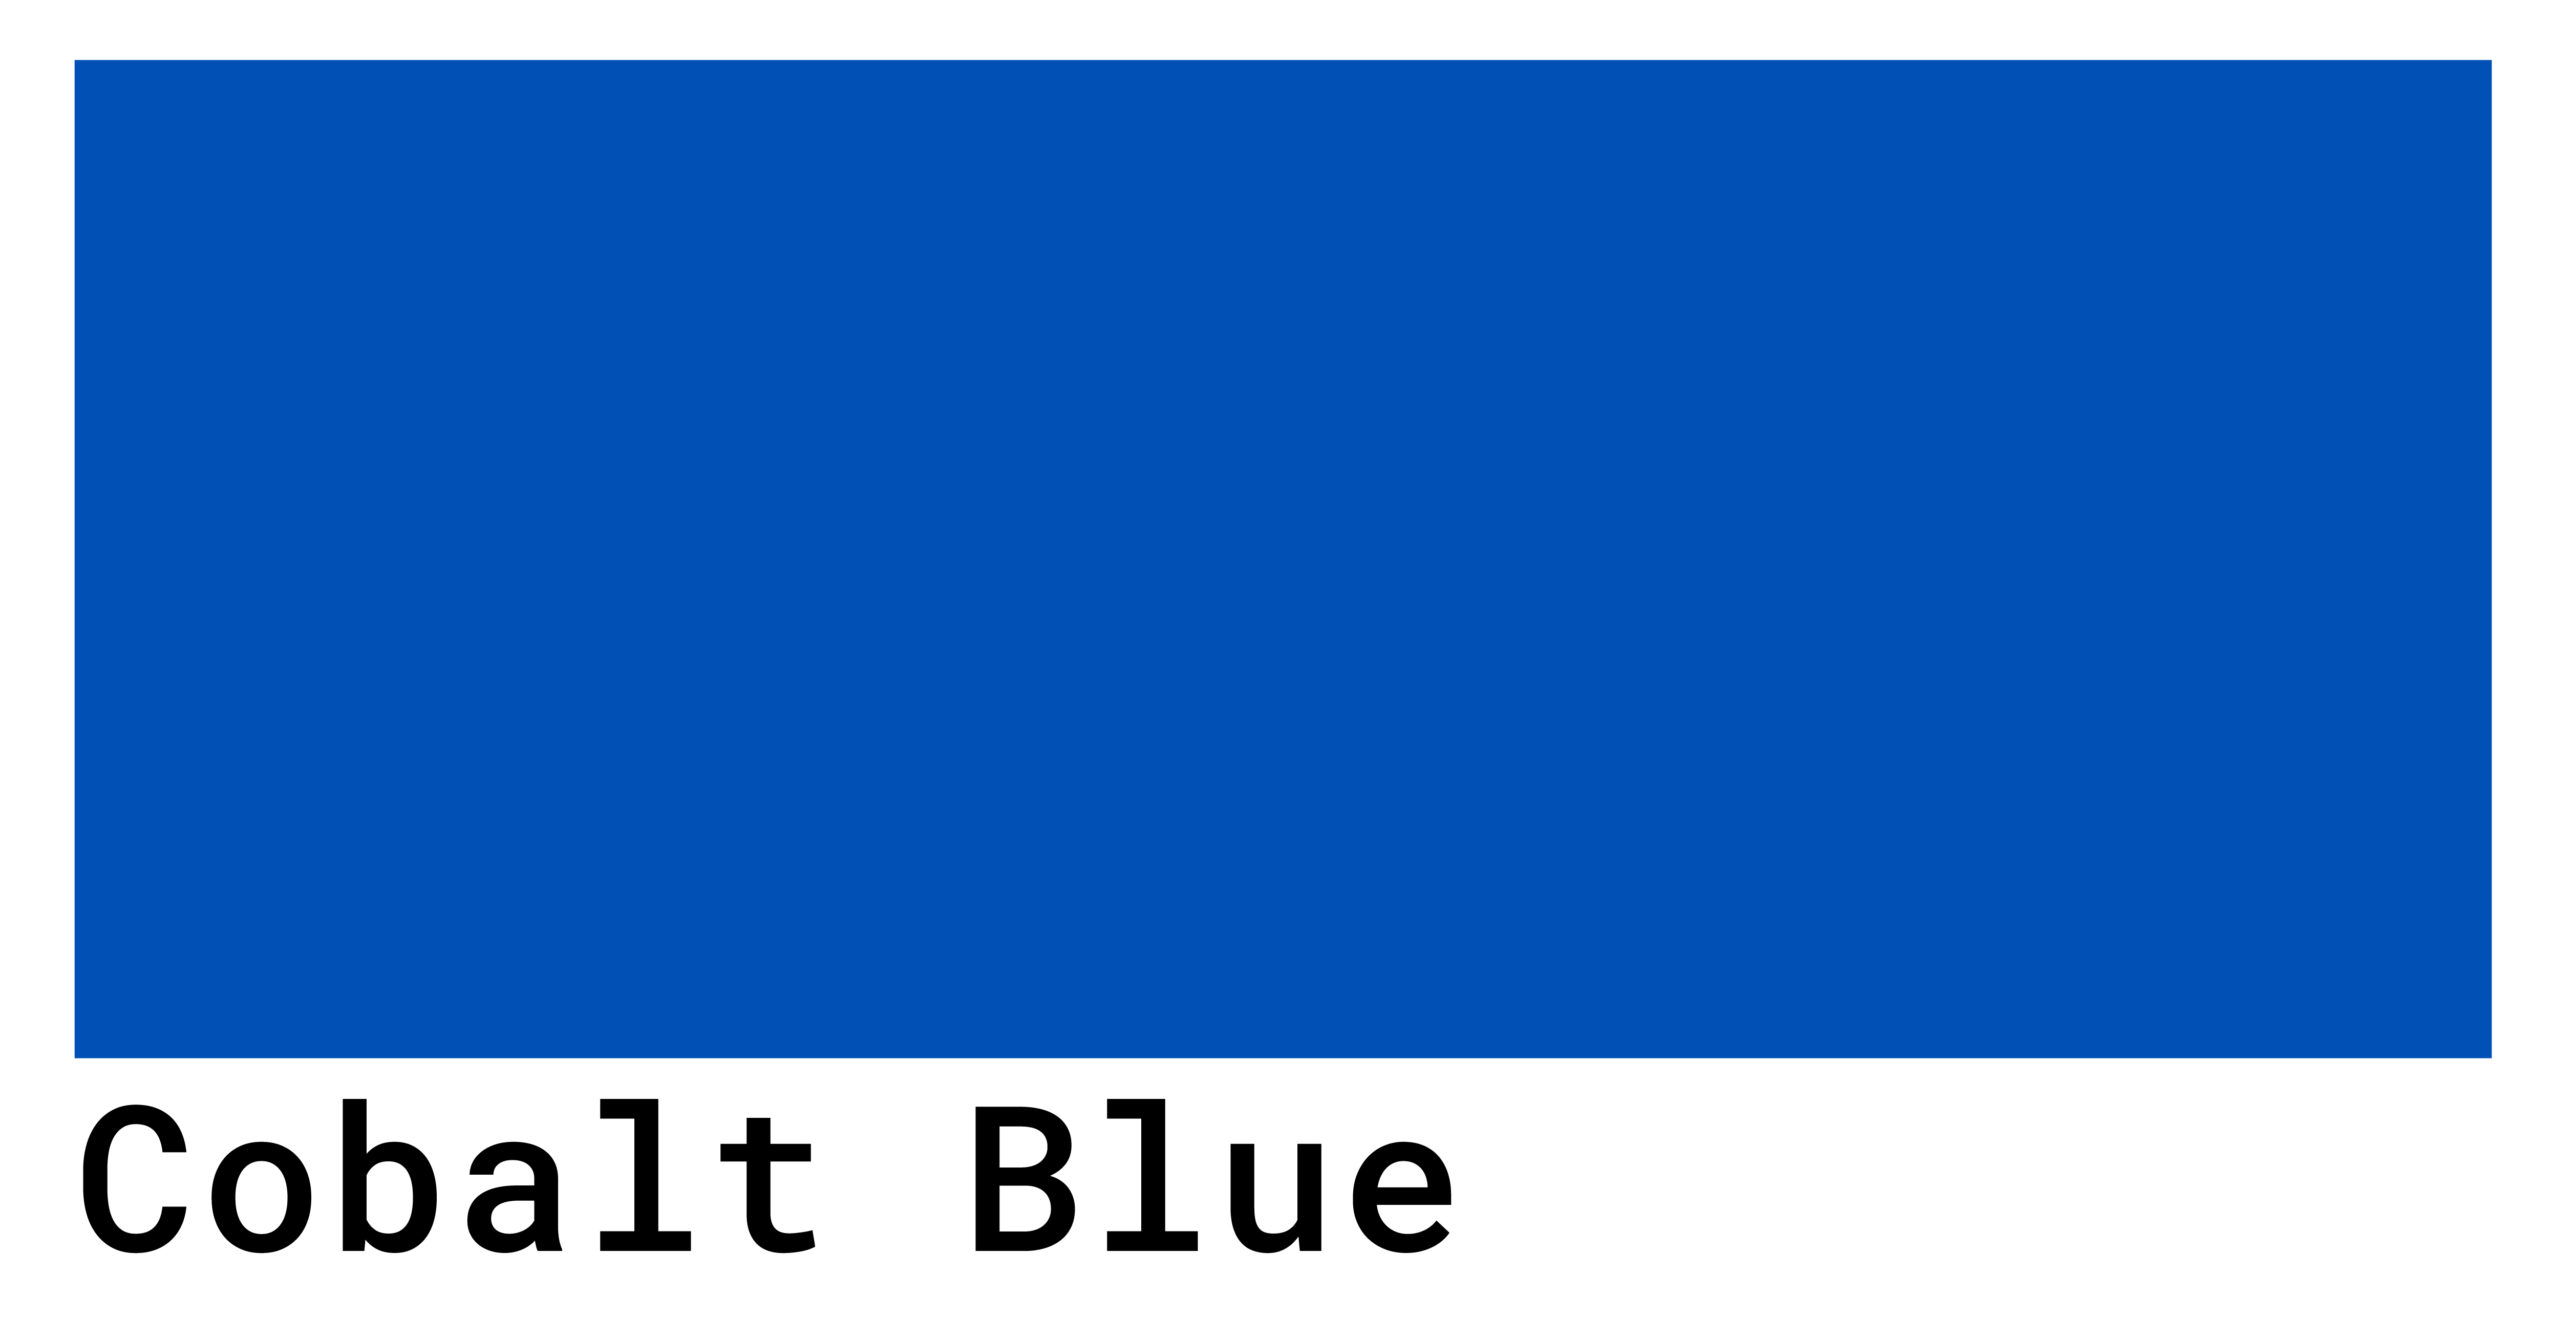 Cobalt Blue Color Codes - The Hex, RGB and CMYK Values That You Need